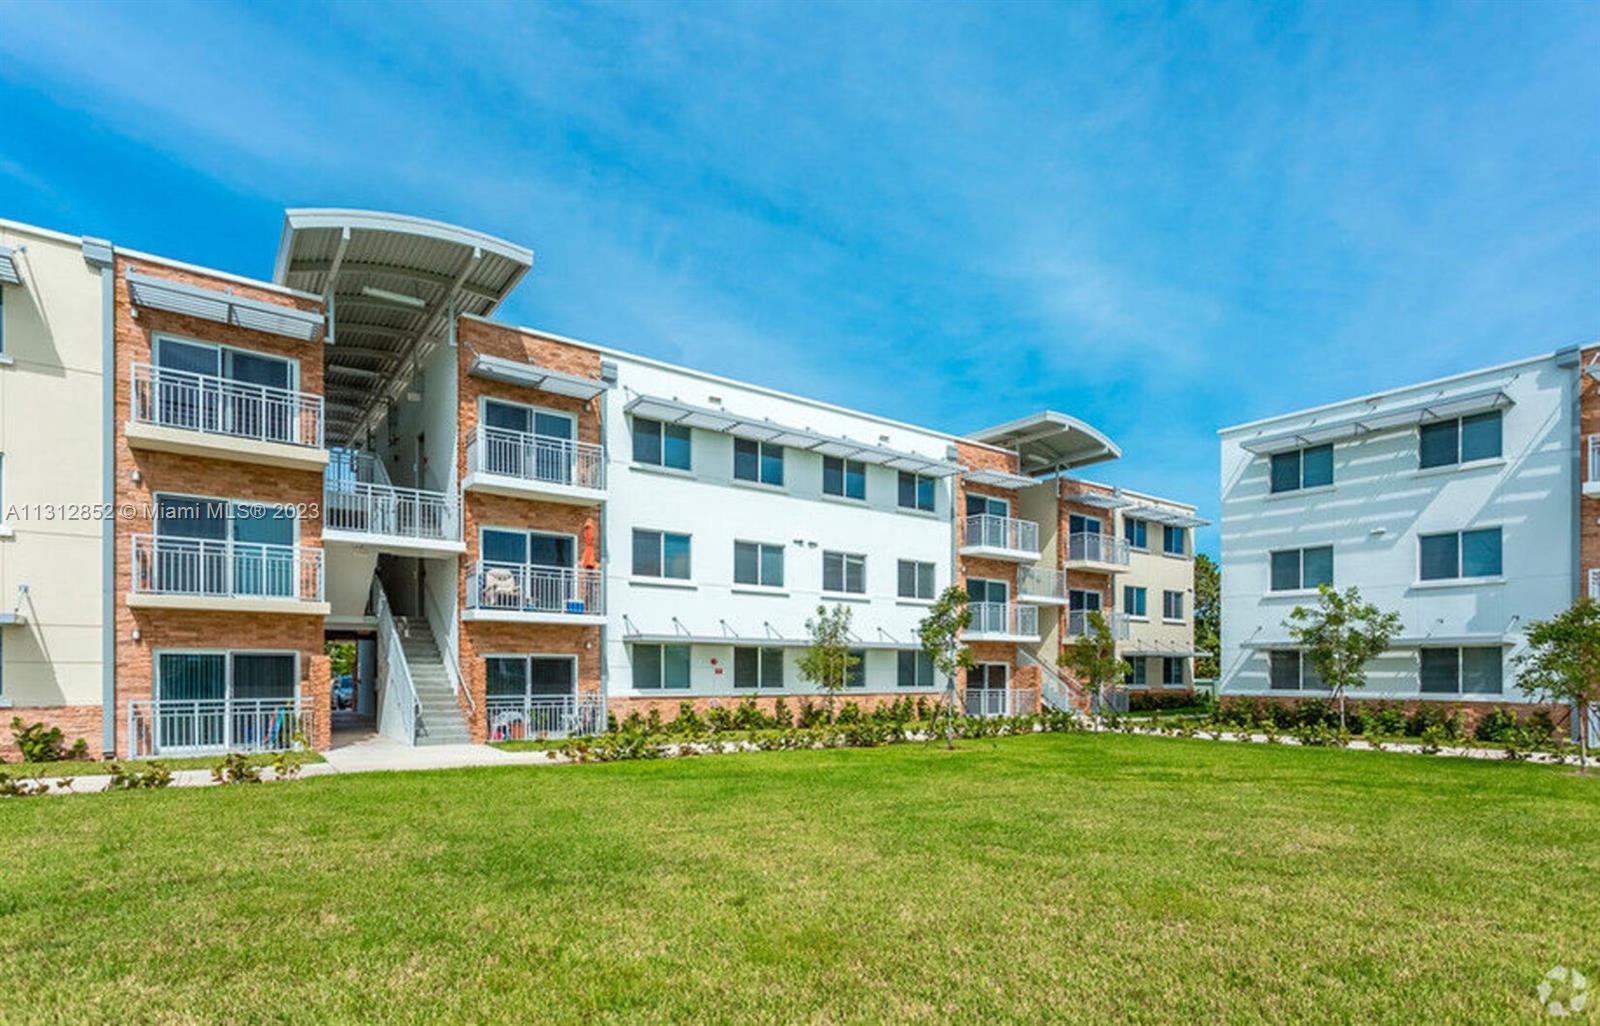 Modern Apartments just minutes from the highway. Multiple units available with 1, 2 & 3 bedrooms. Move in ready with rapid approval. Pet friendly community. Amenities include: 24-Hour Emergency Maintenance 24-Hour Fitness Center Children Play Area Controlled Access Multi-Purpose Clubhouse Online Hassle Free Payments Swimming Pool & More